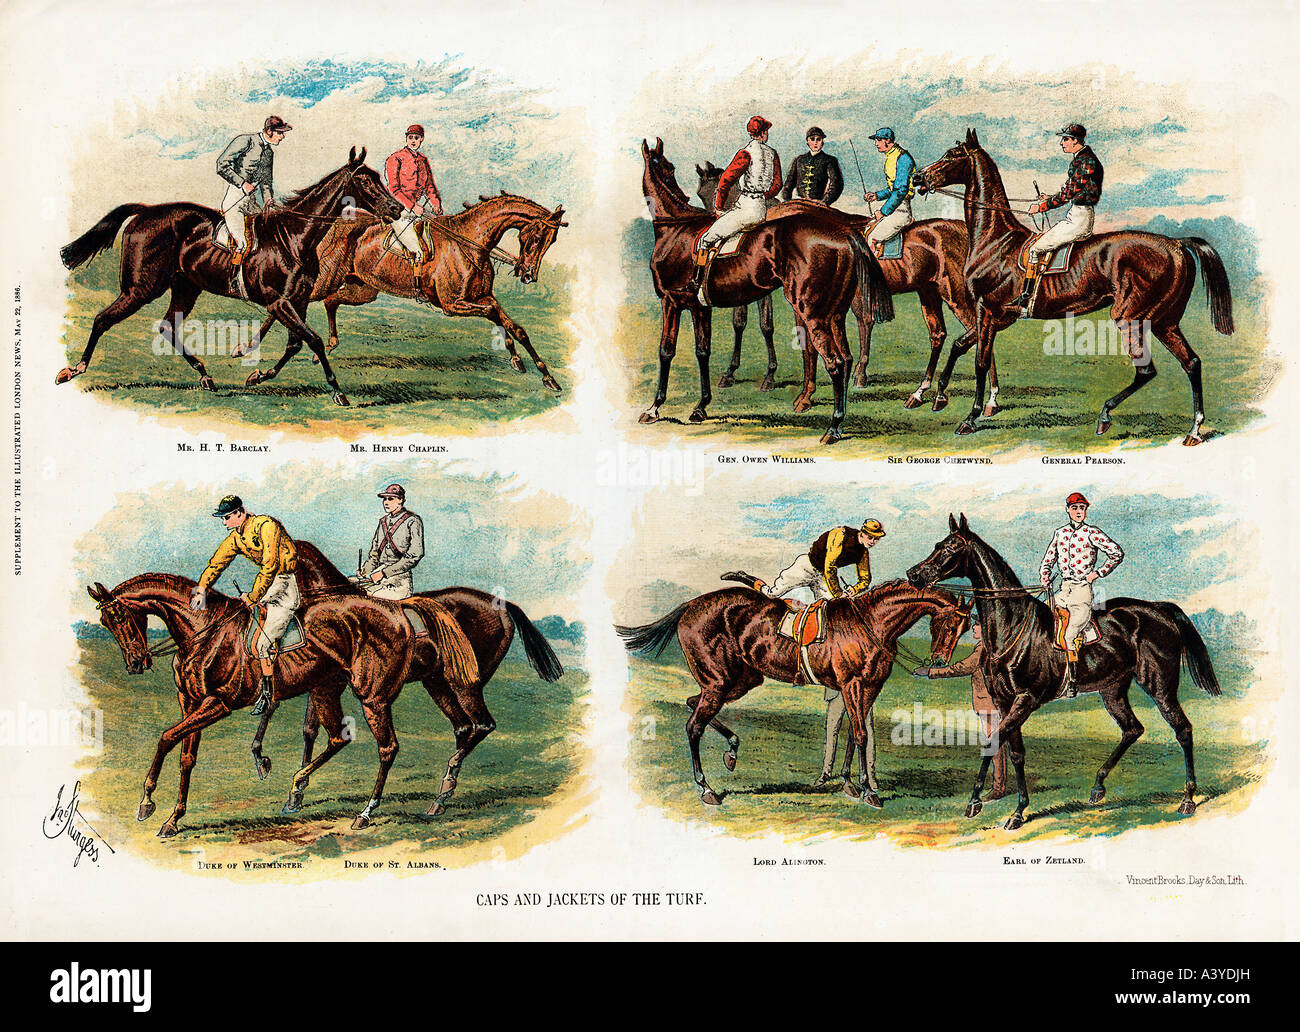 Caps and Jackets Of The Turf 3 1886 review of racing colours of famous owners of race horses Stock Photo